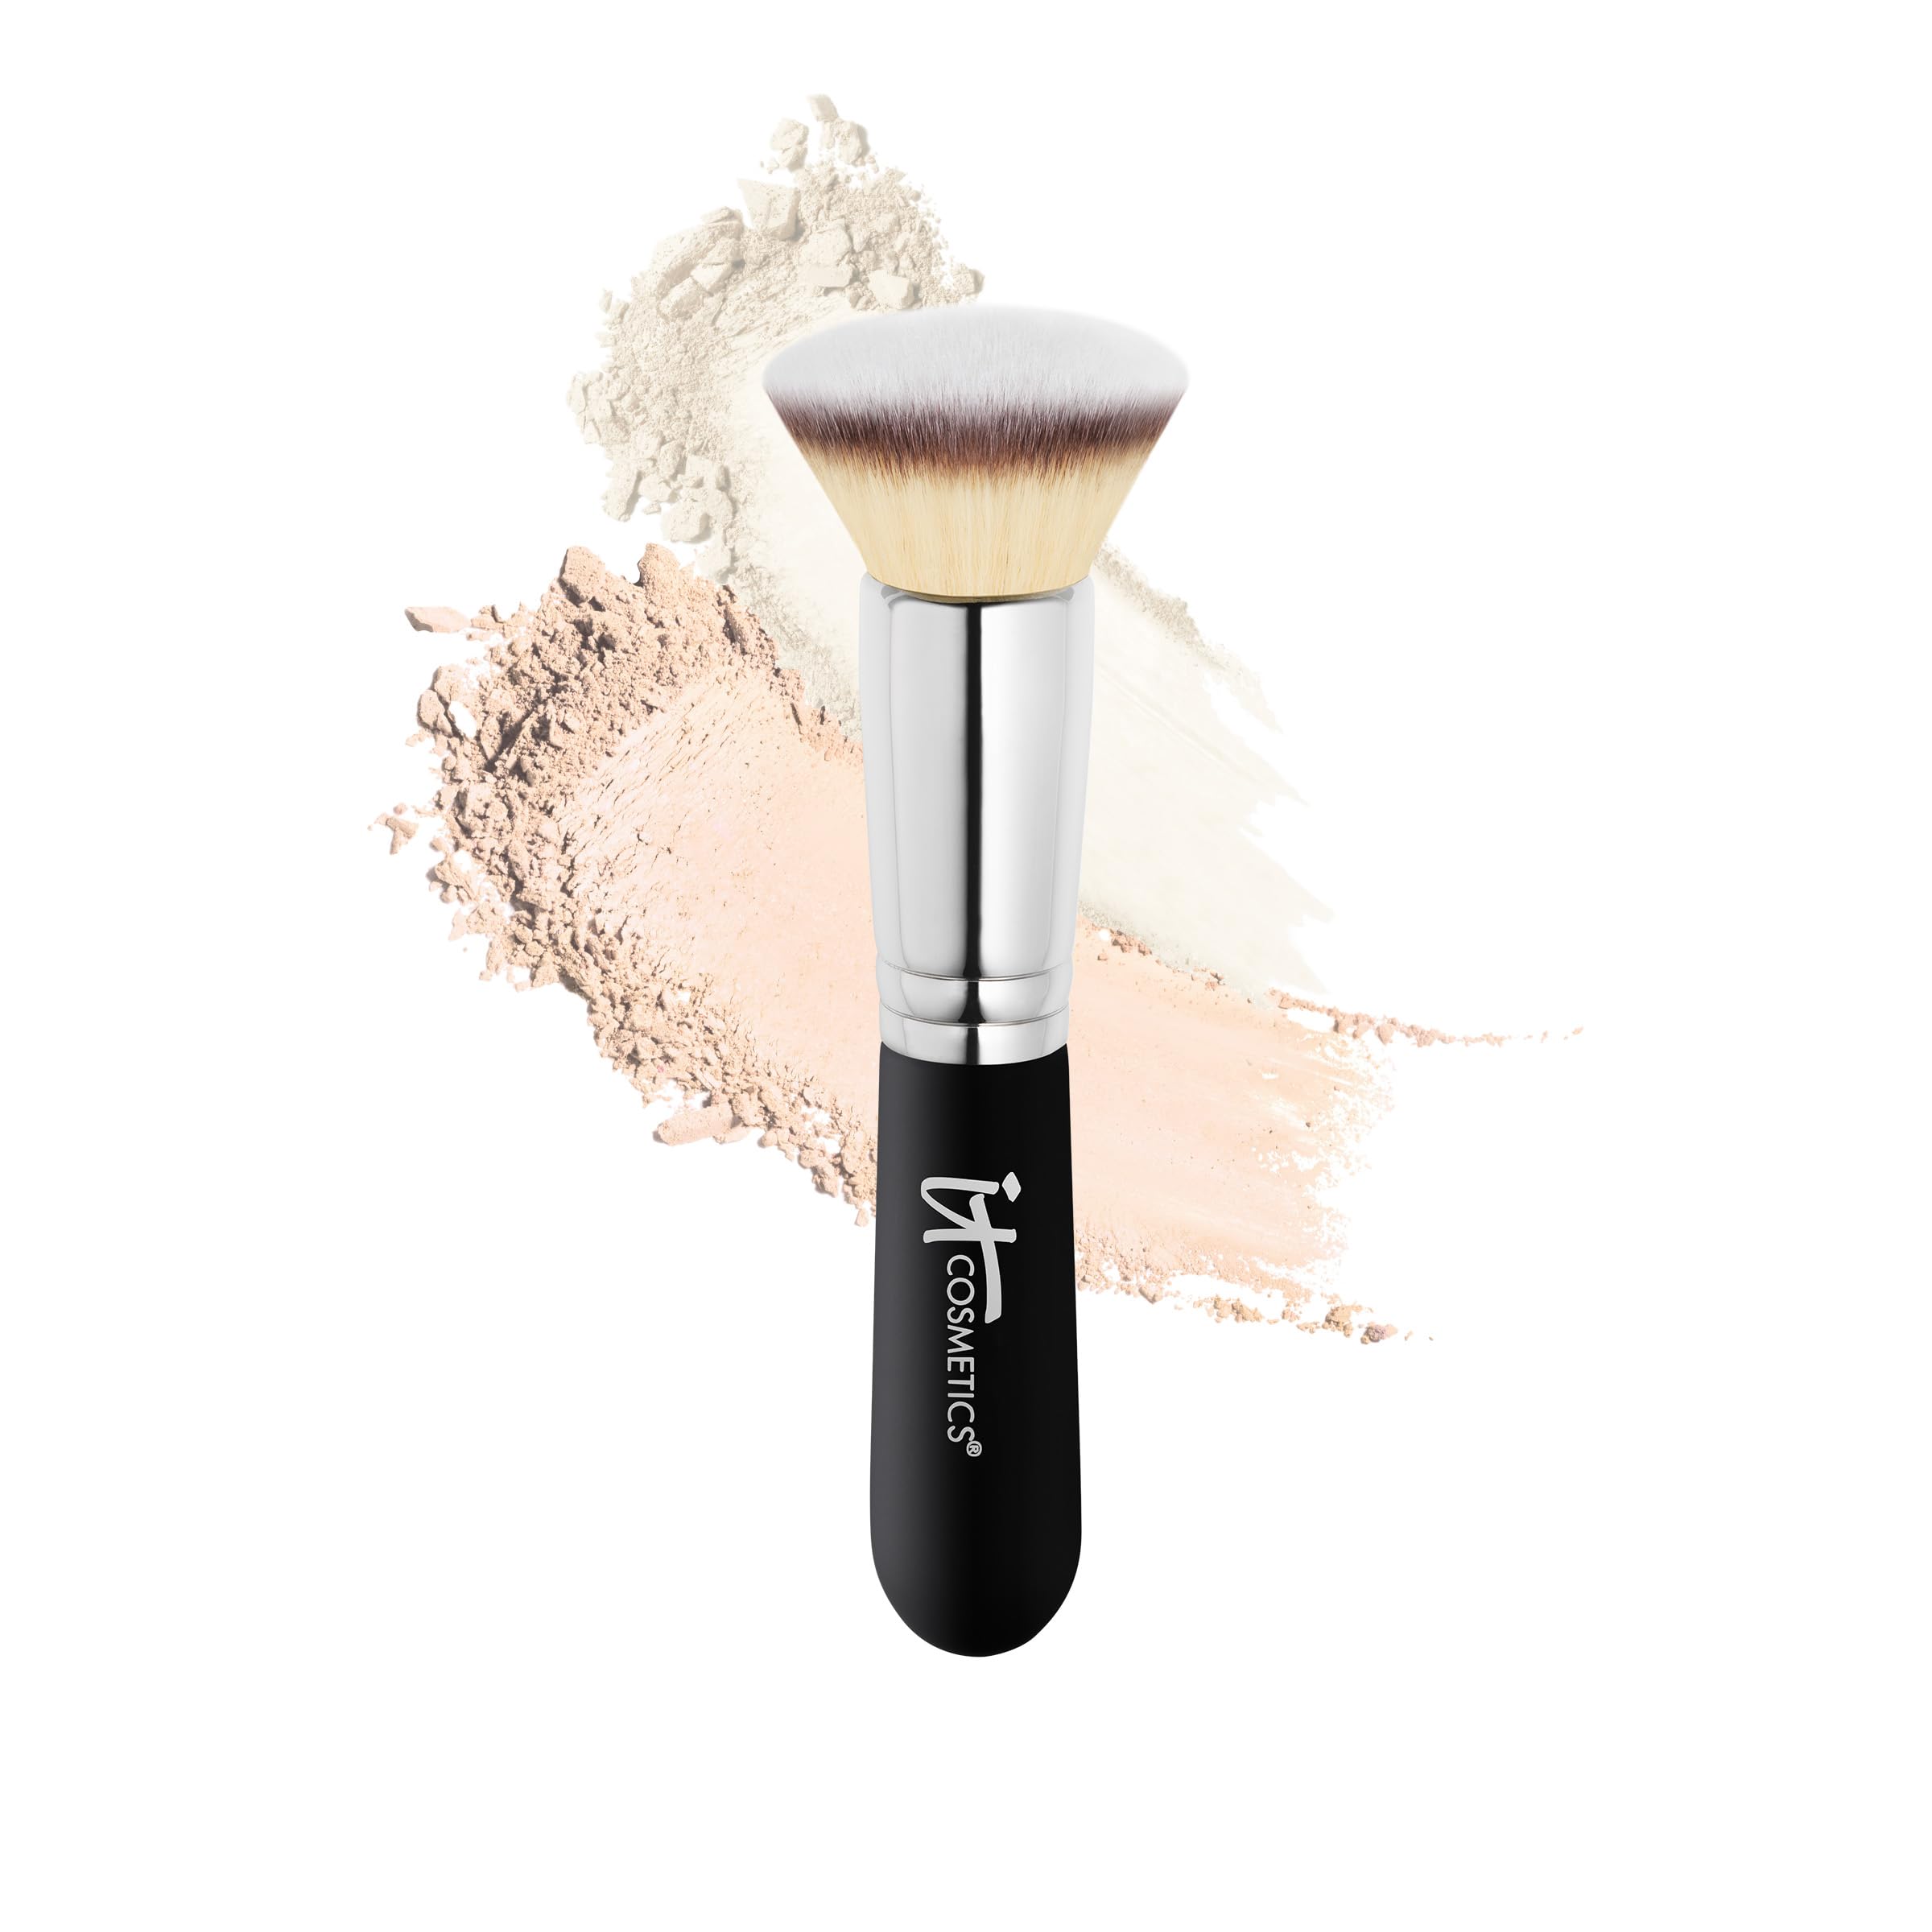 IT Cosmetics Heavenly Luxe Flat Top Buffing Foundation Brush #6 - For Liquid & Powder Foundation - Buff Away the Look of Pores, Fine Lines & Wrinkles - With Award-Winning Heavenly Luxe Hair